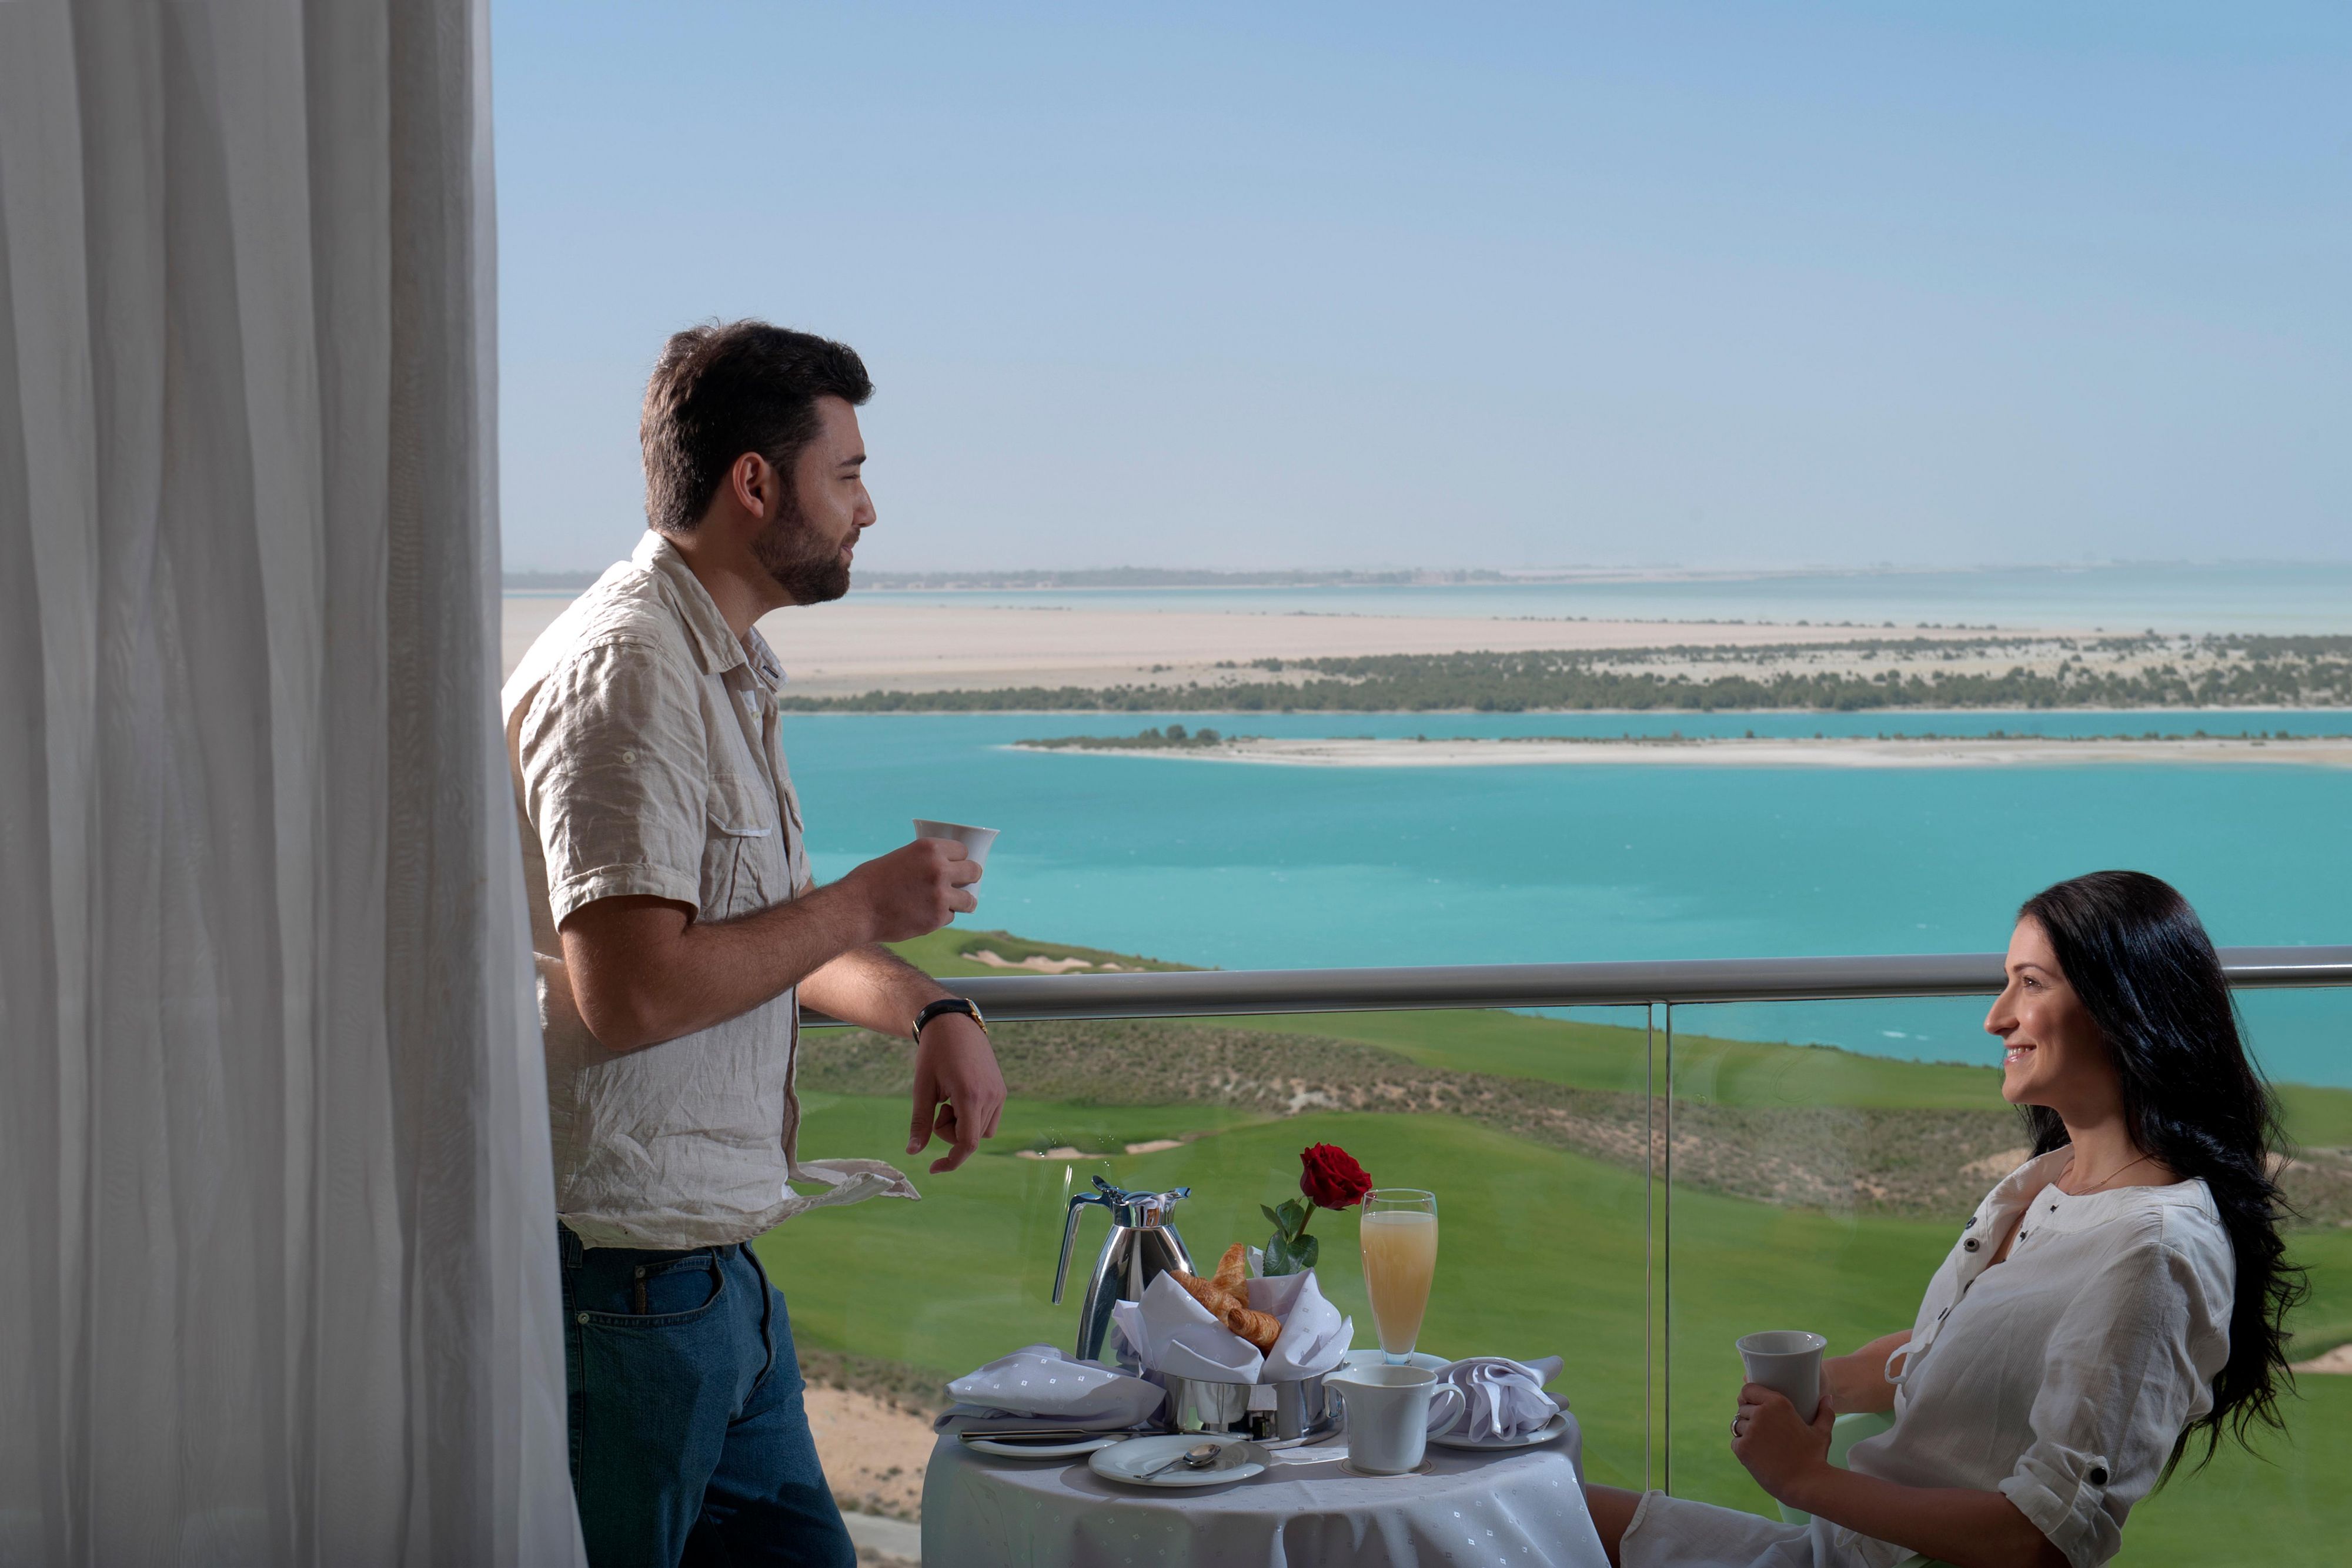 Our Deluxe rooms give you unparalleled views over the Gulf waters